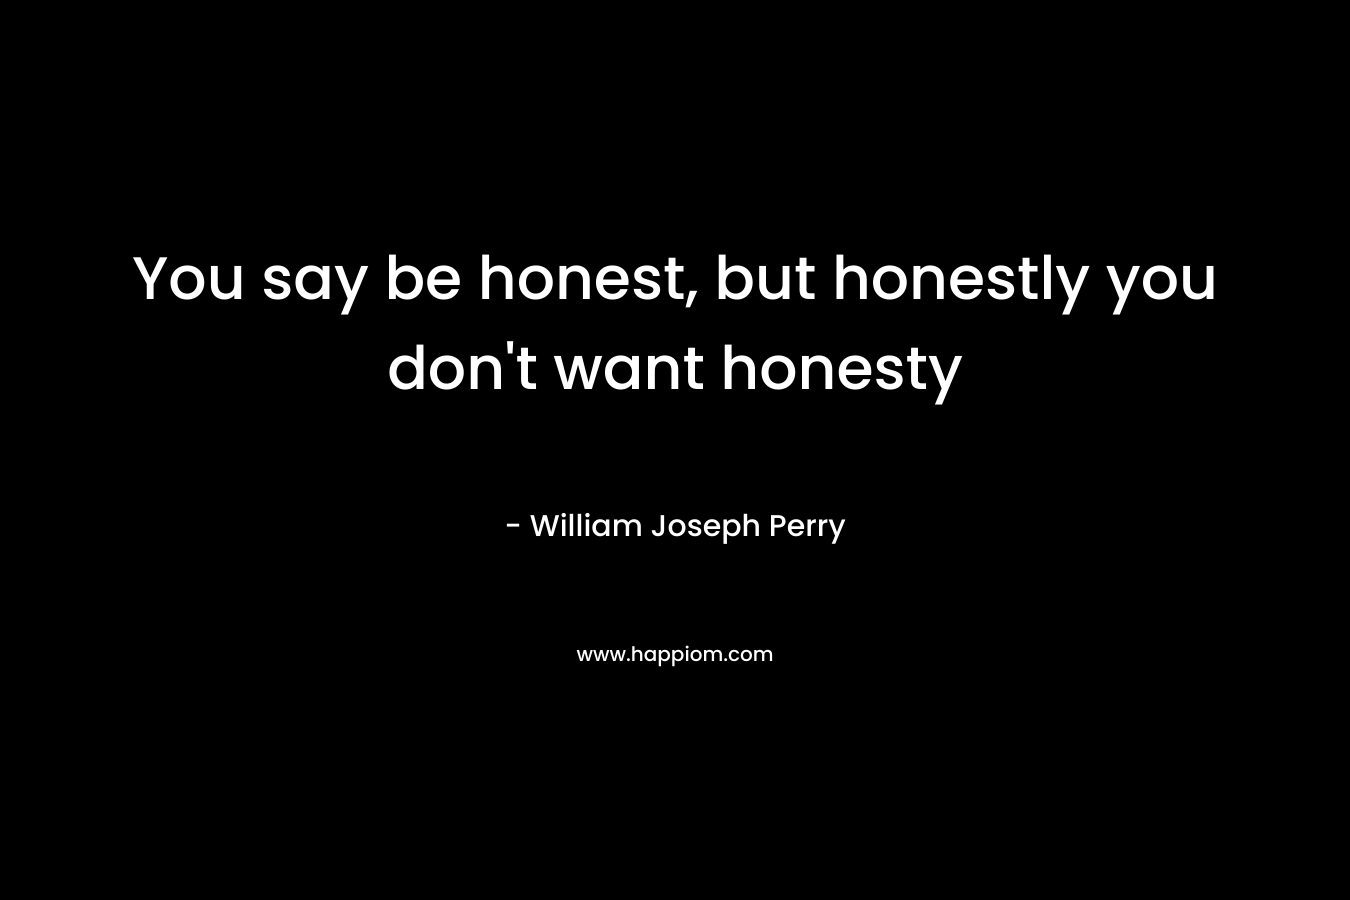 You say be honest, but honestly you don't want honesty